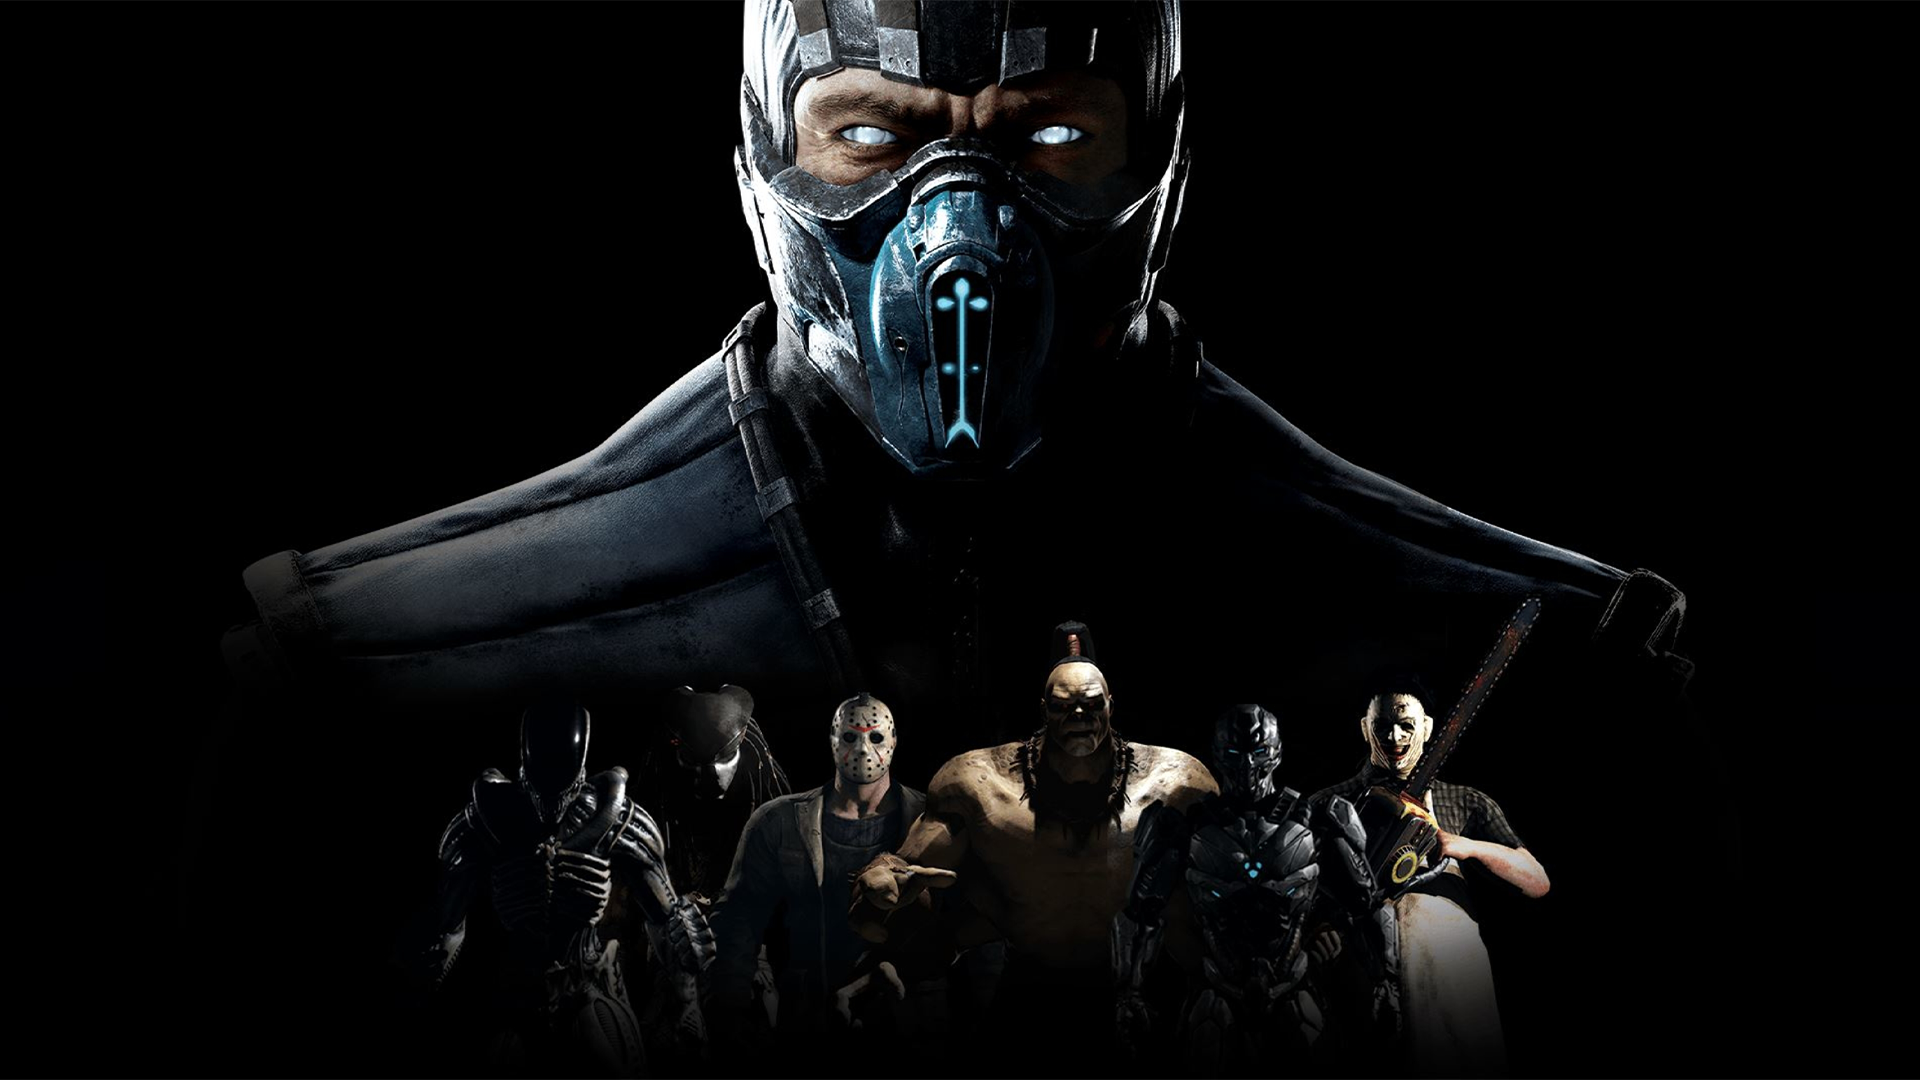 Mortal Kombat XL for PC developed by our team!